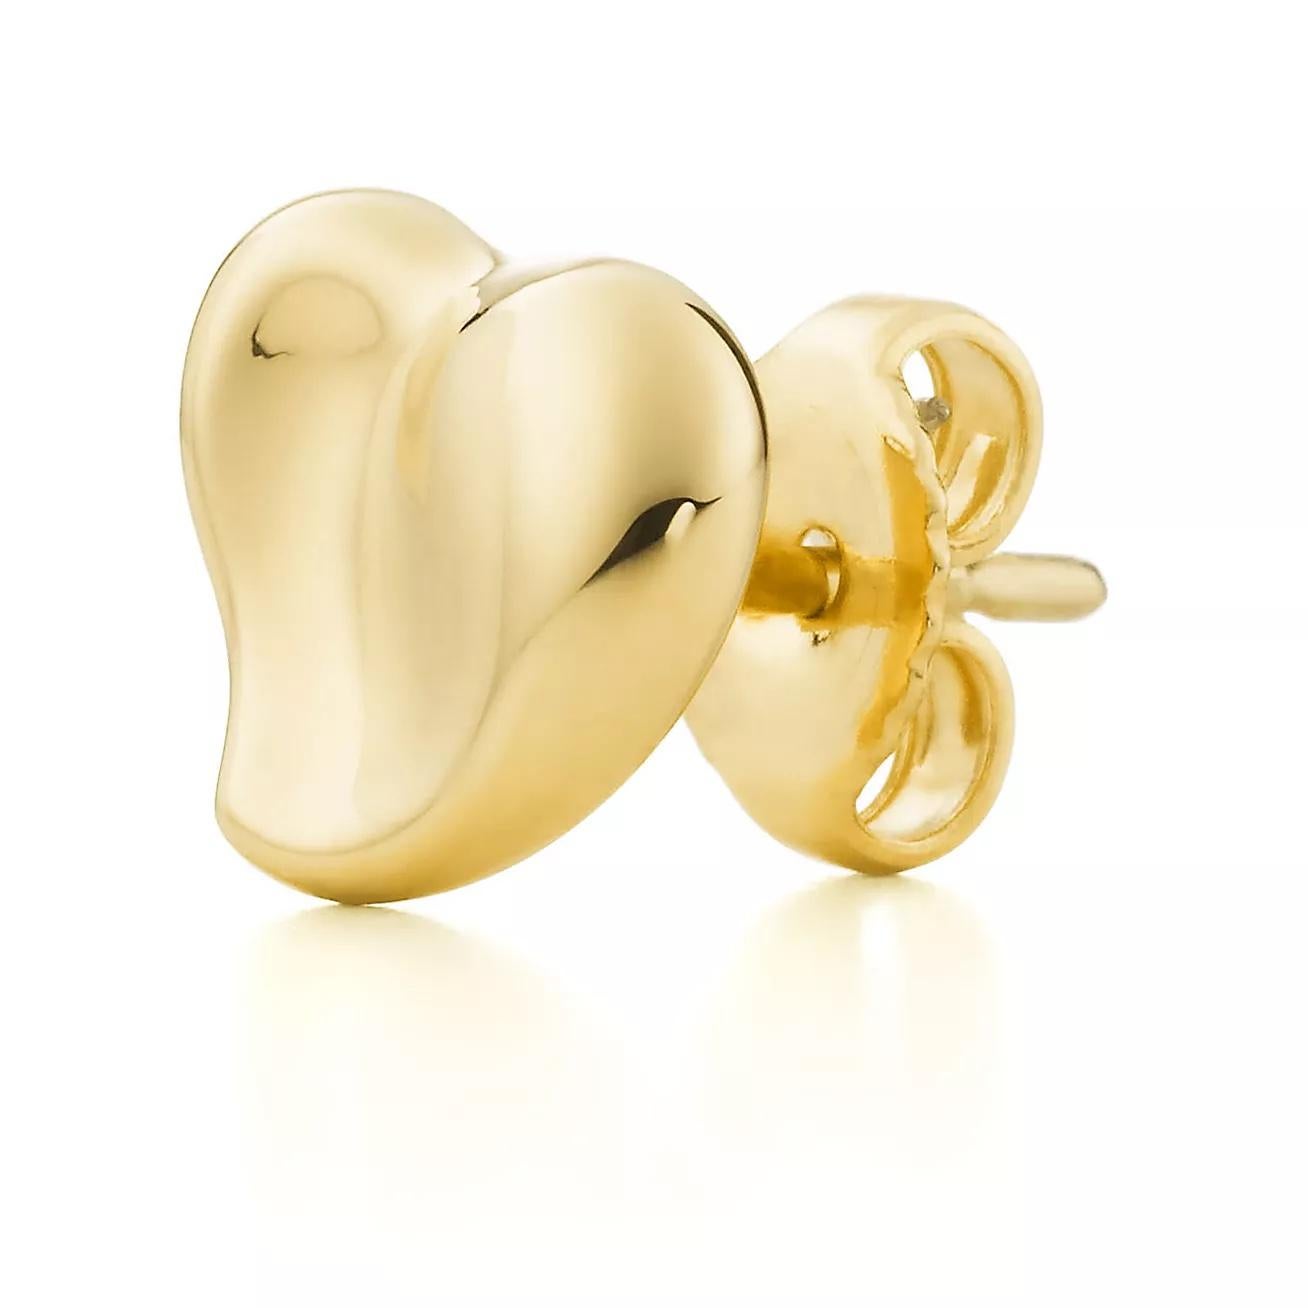 Beautiful pair of earrings by famed designer Elsa Peretti for Tiffany & Co. The pair are crafted in solid 18k yellow gold and known as the Full Heart stud earrings. Peretti's take on a heart design in luscious yellow gold that sit perfectly on the